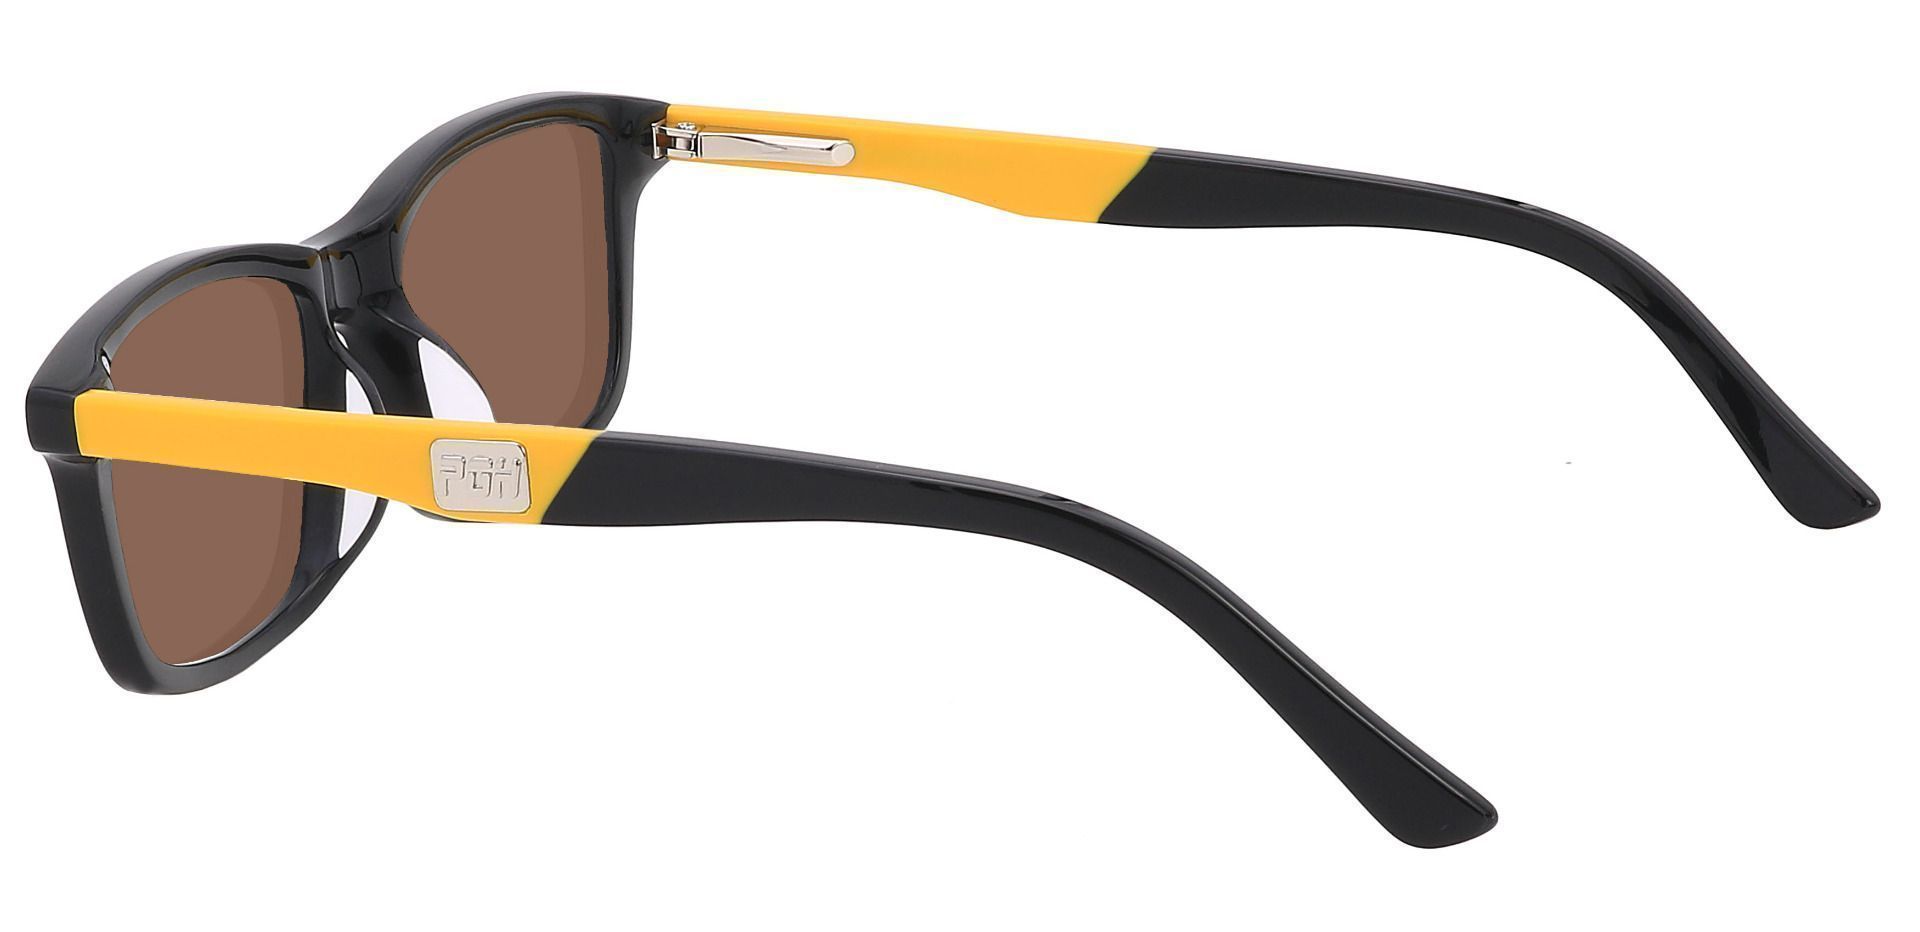 Allegheny Rectangle Reading Sunglasses - Black Frame With Brown Lenses